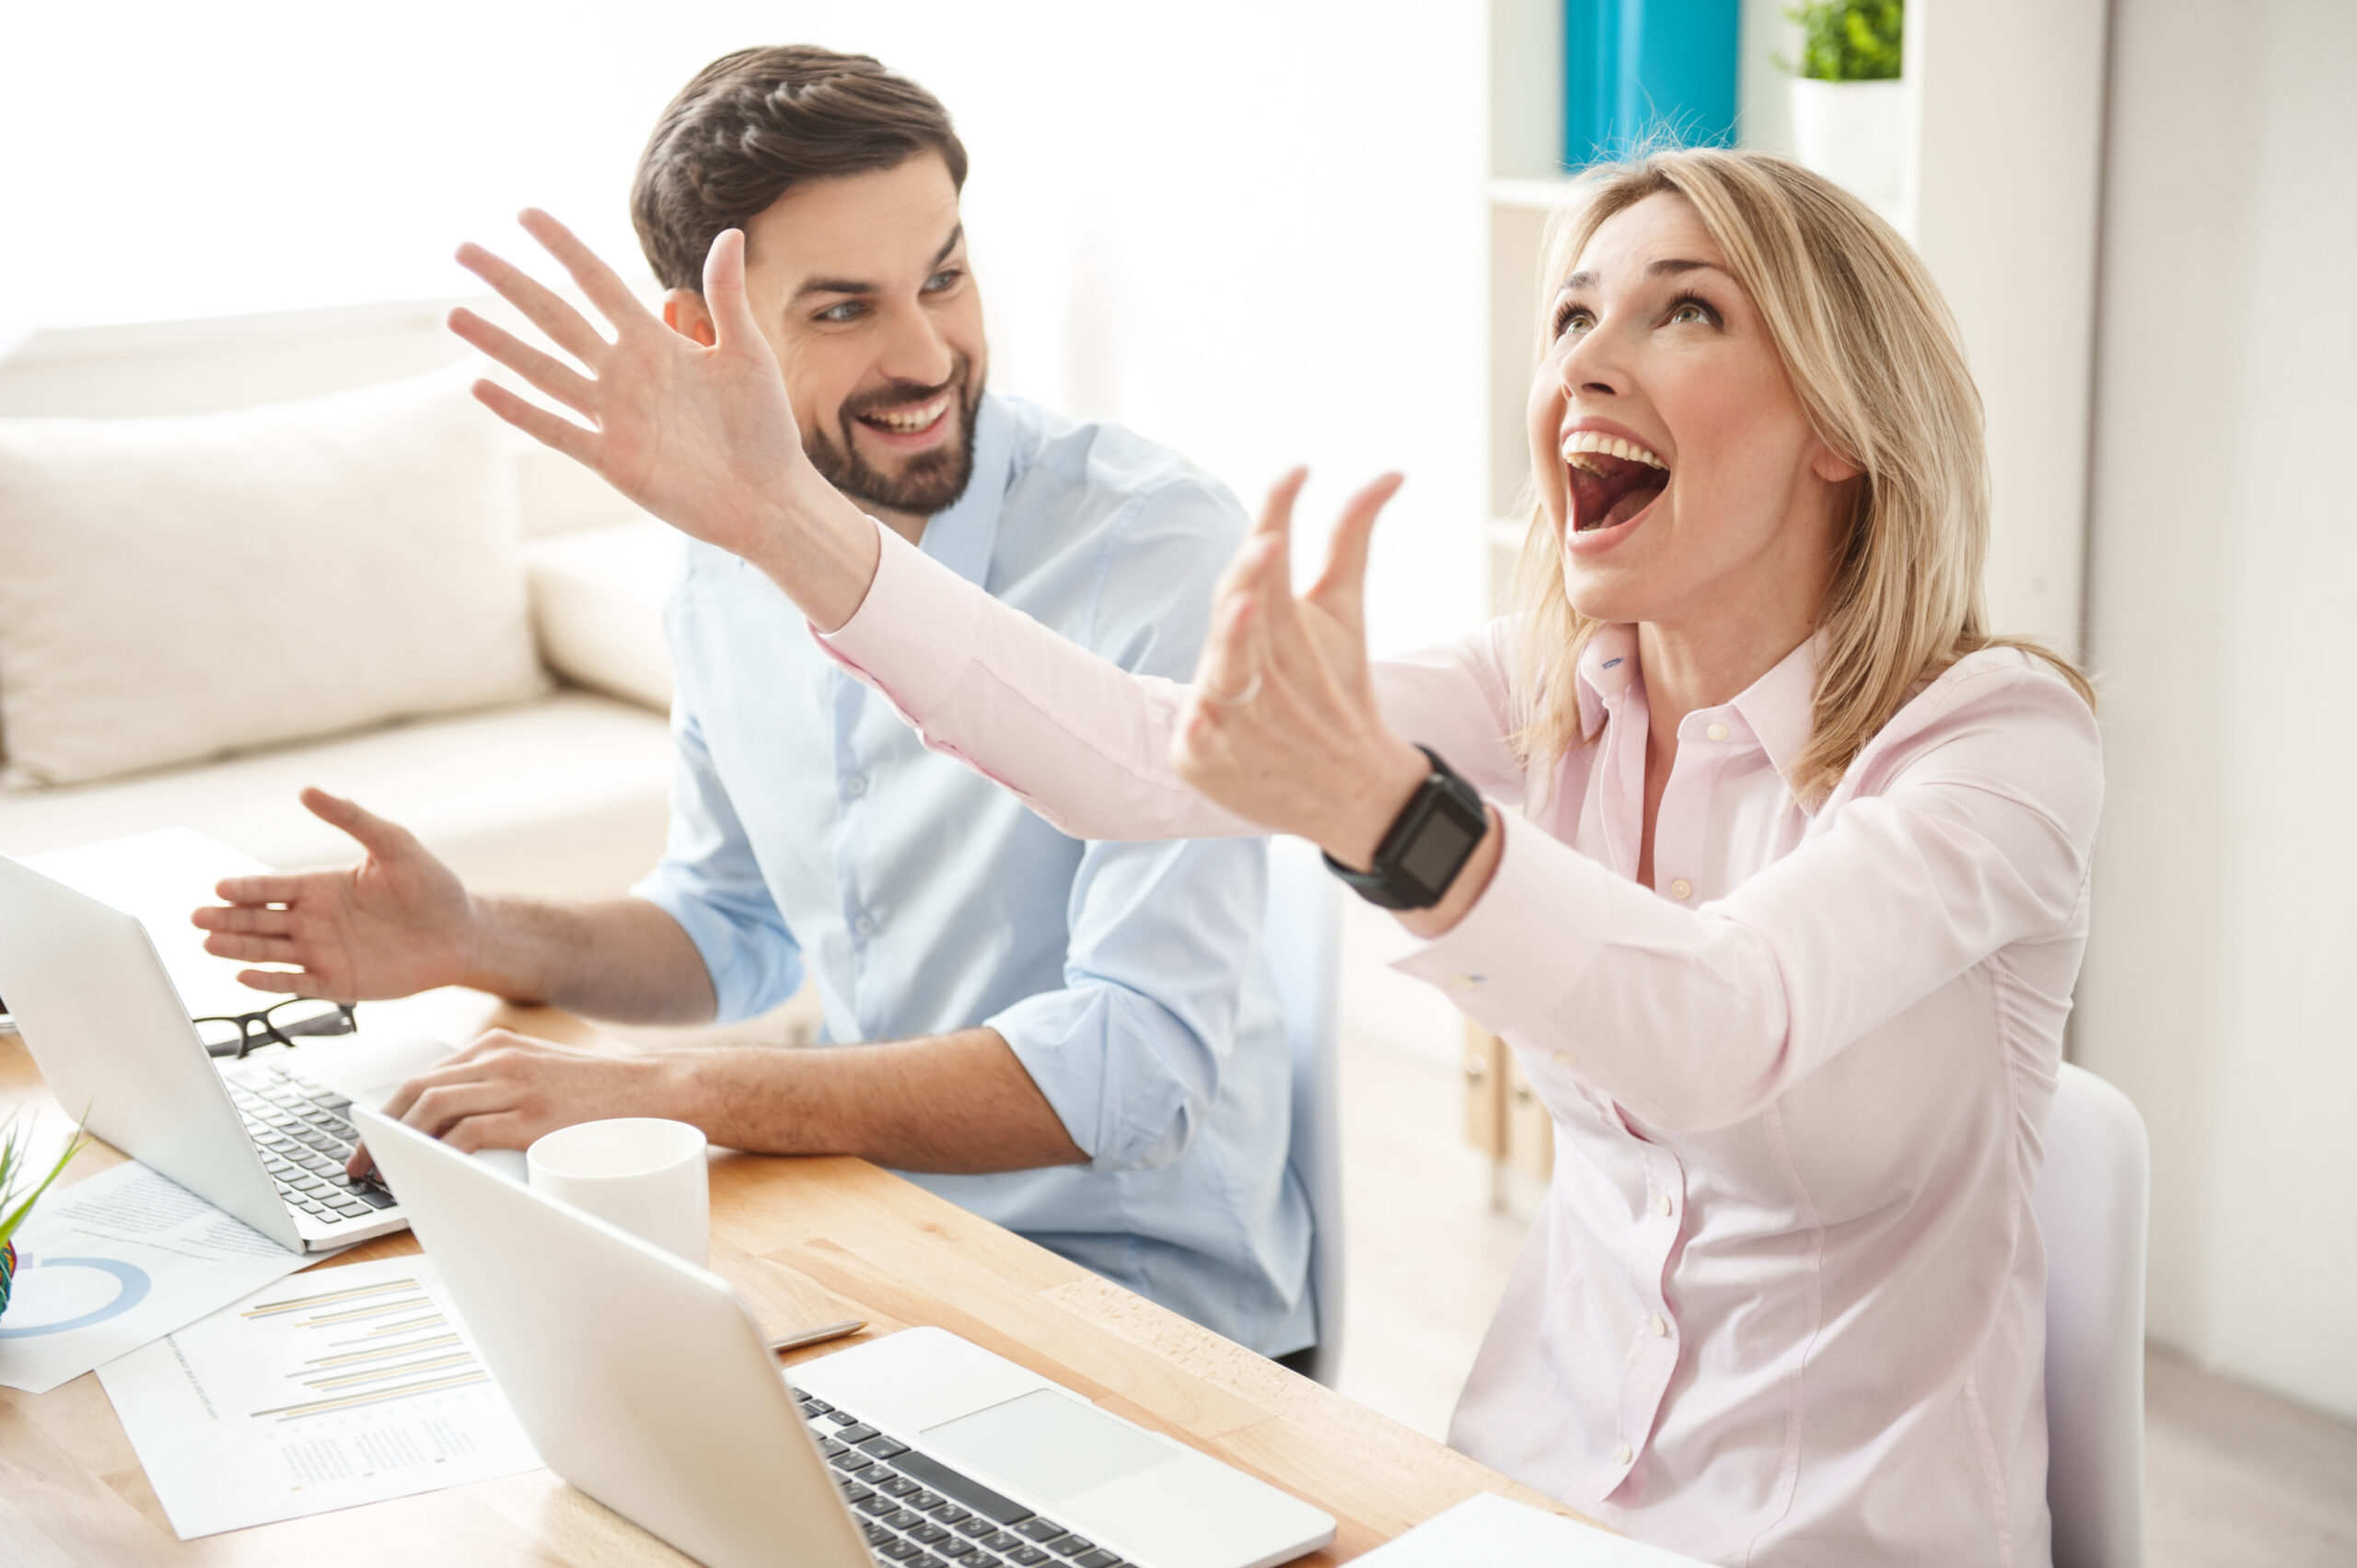 Young woman and man looking at their computers with excitement since they have just learned about Finding Ideal Prospects on LinkedIn For Free